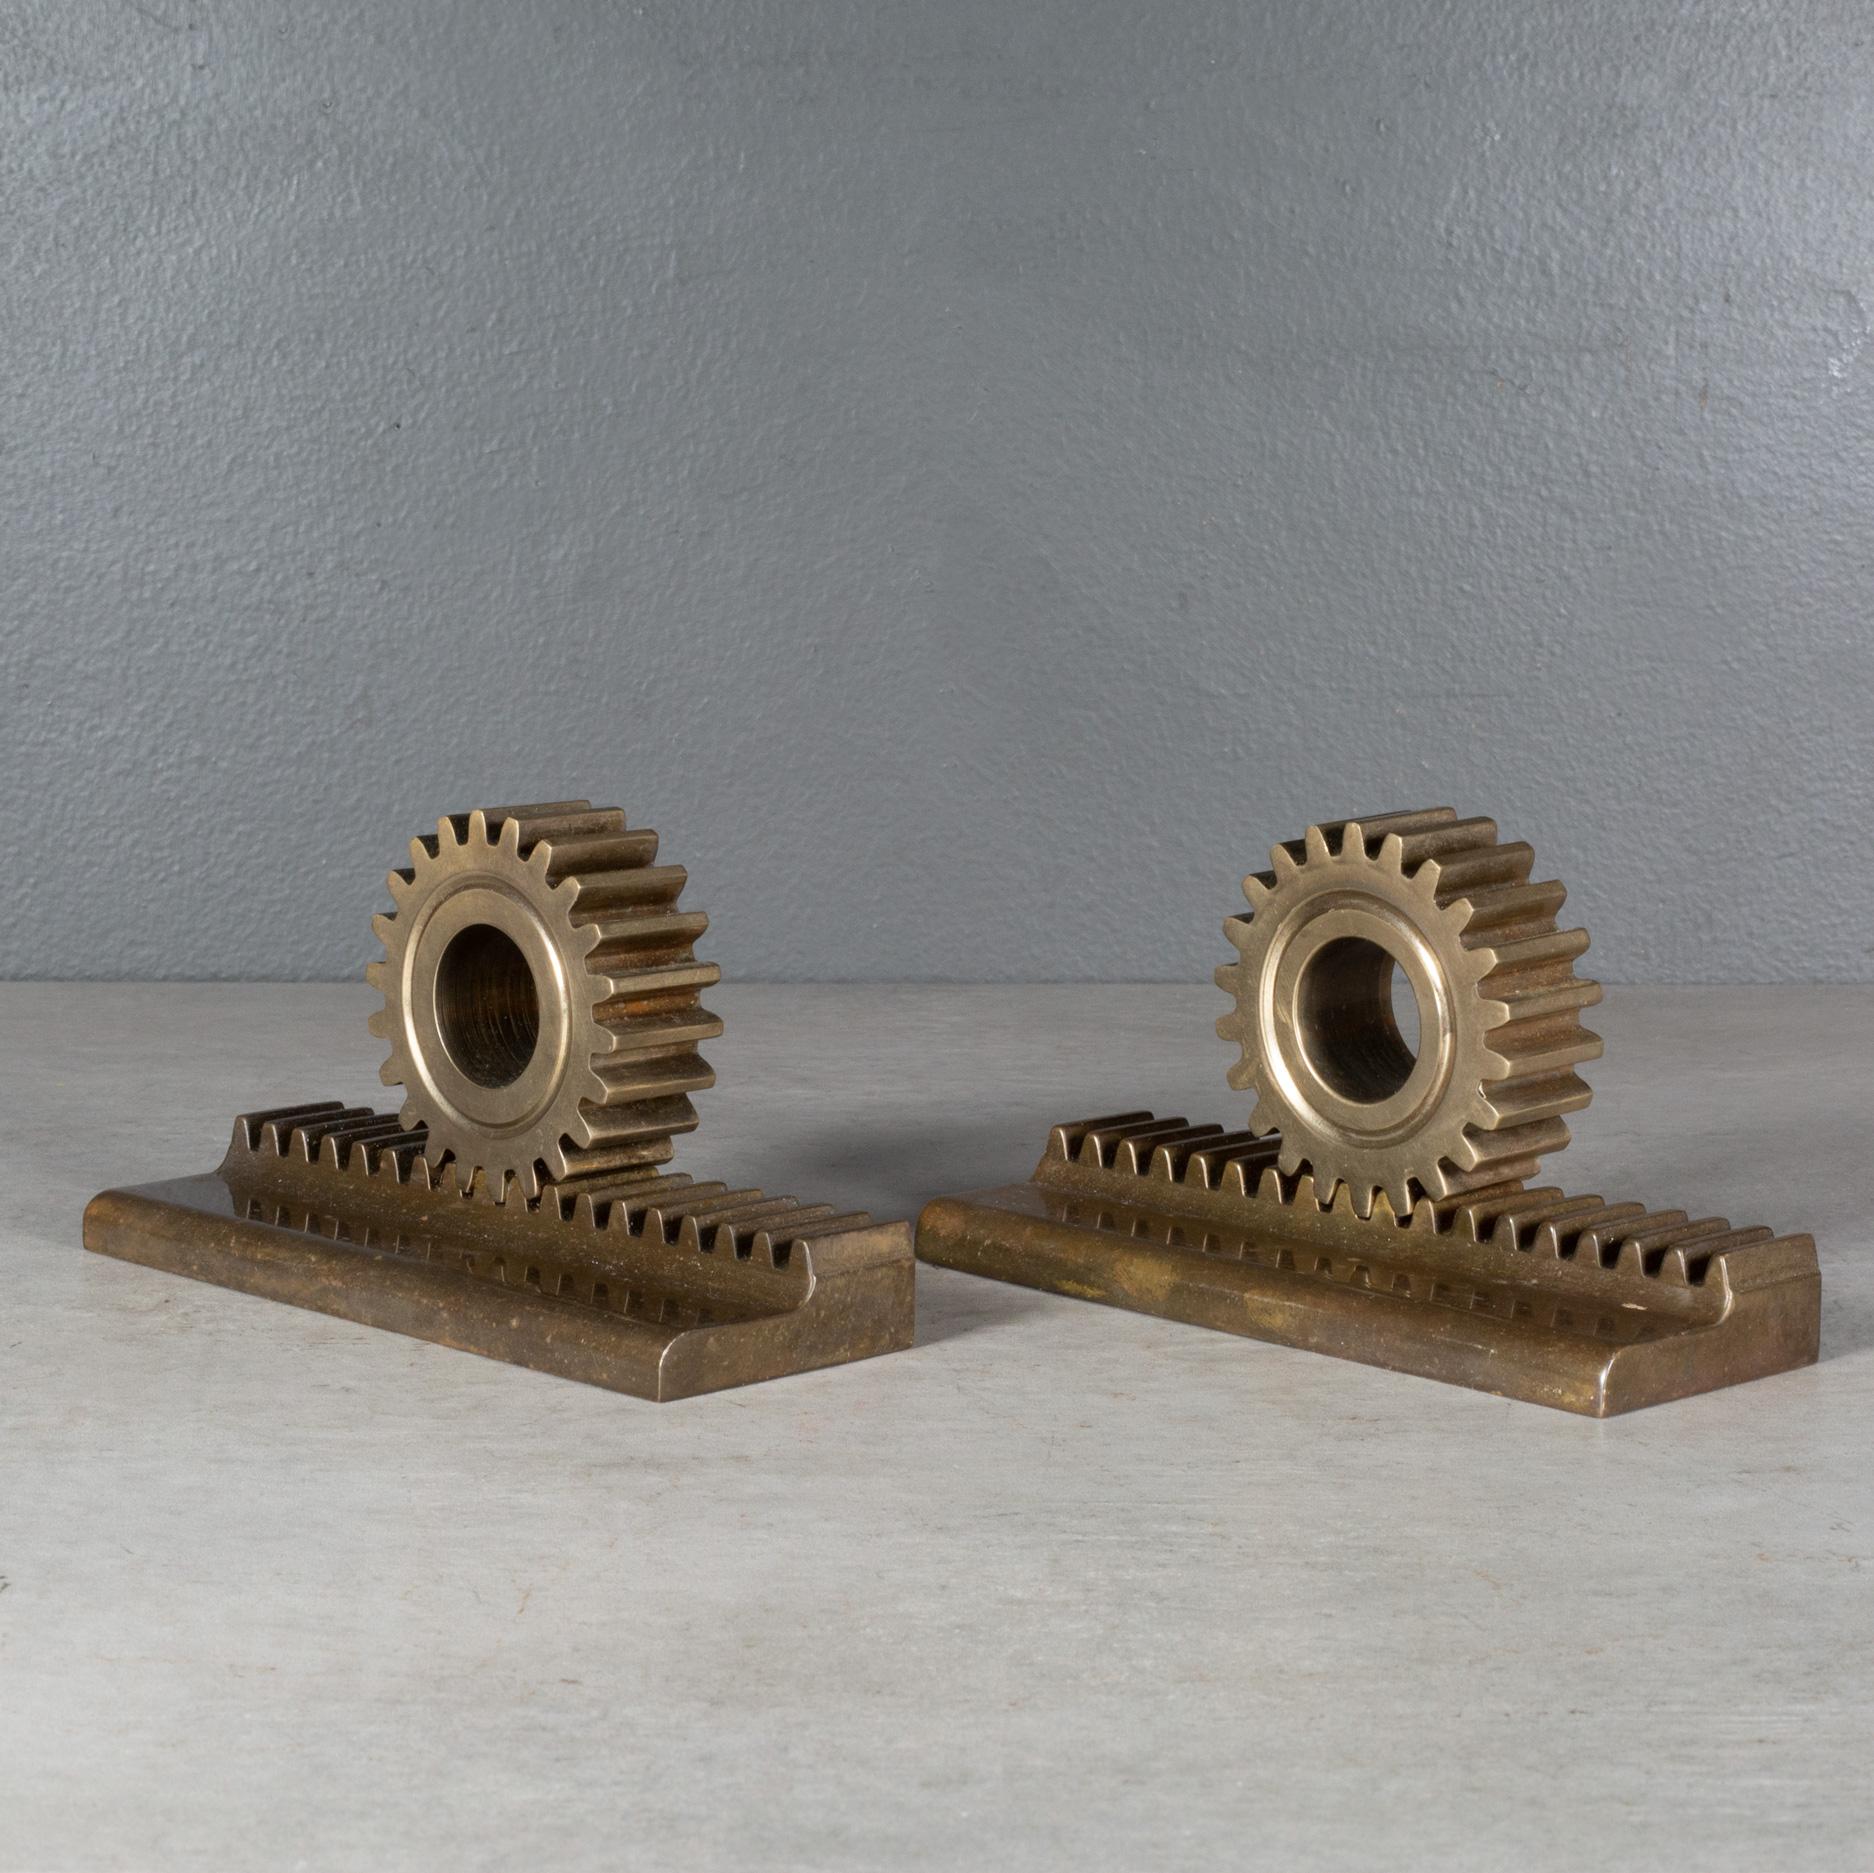 ABOUT

A pair of solid bronze gear bookends.

    CREATOR Unknown.
    DATE OF MANUFACTURE c.1960-1970.
    MATERIALS AND TECHNIQUES Solid Bronze.
    CONDITION Good. Wear consistent with age and use.
    DIMENSIONS H 3 in. W 5.75 in. D 2